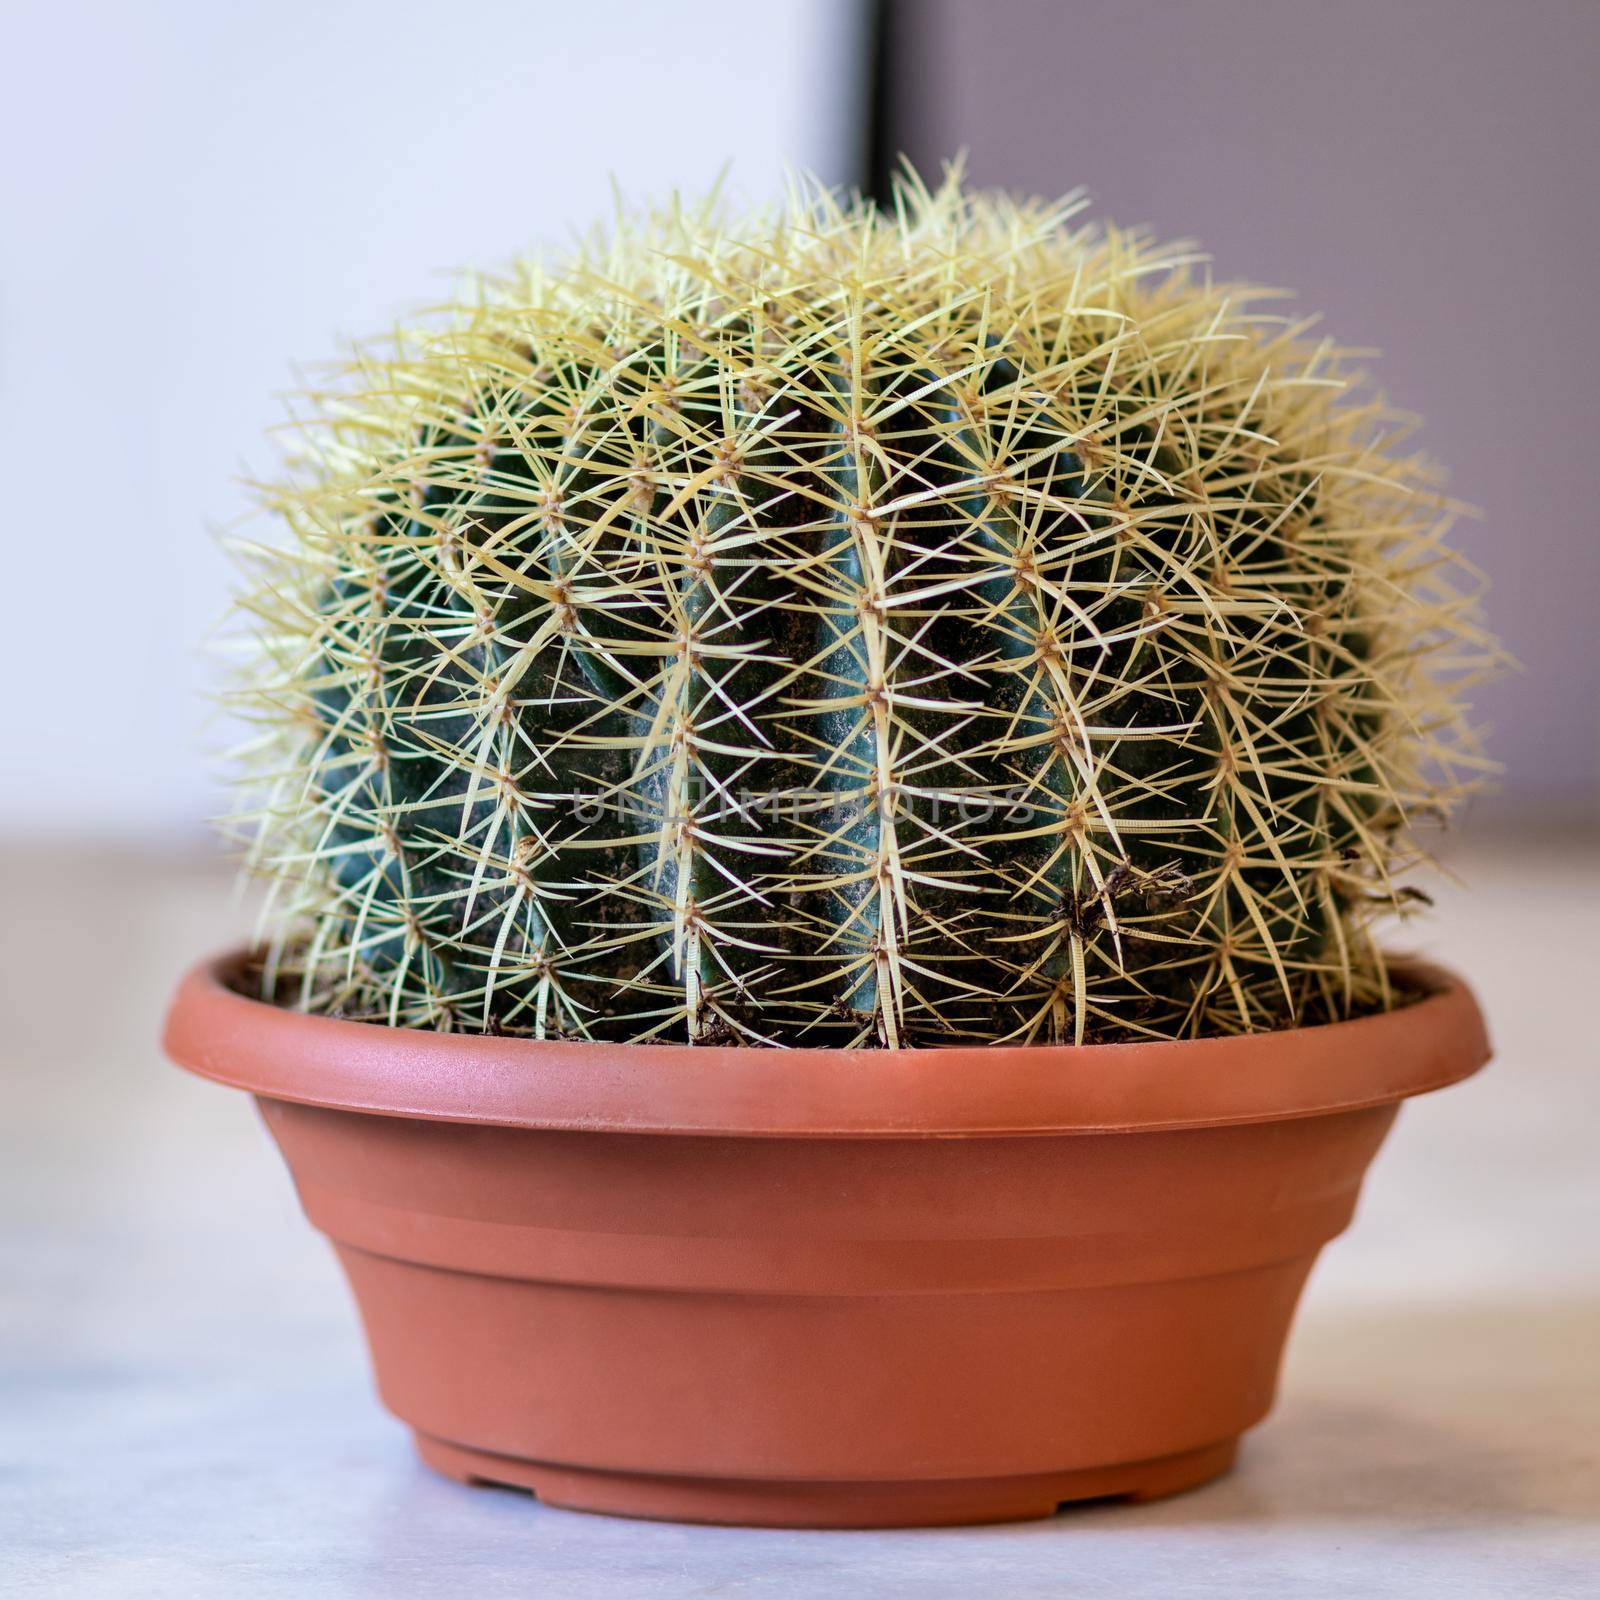 Echinocactus is a genus of cacti in the subfamily Cactoideae cactus by ferhad